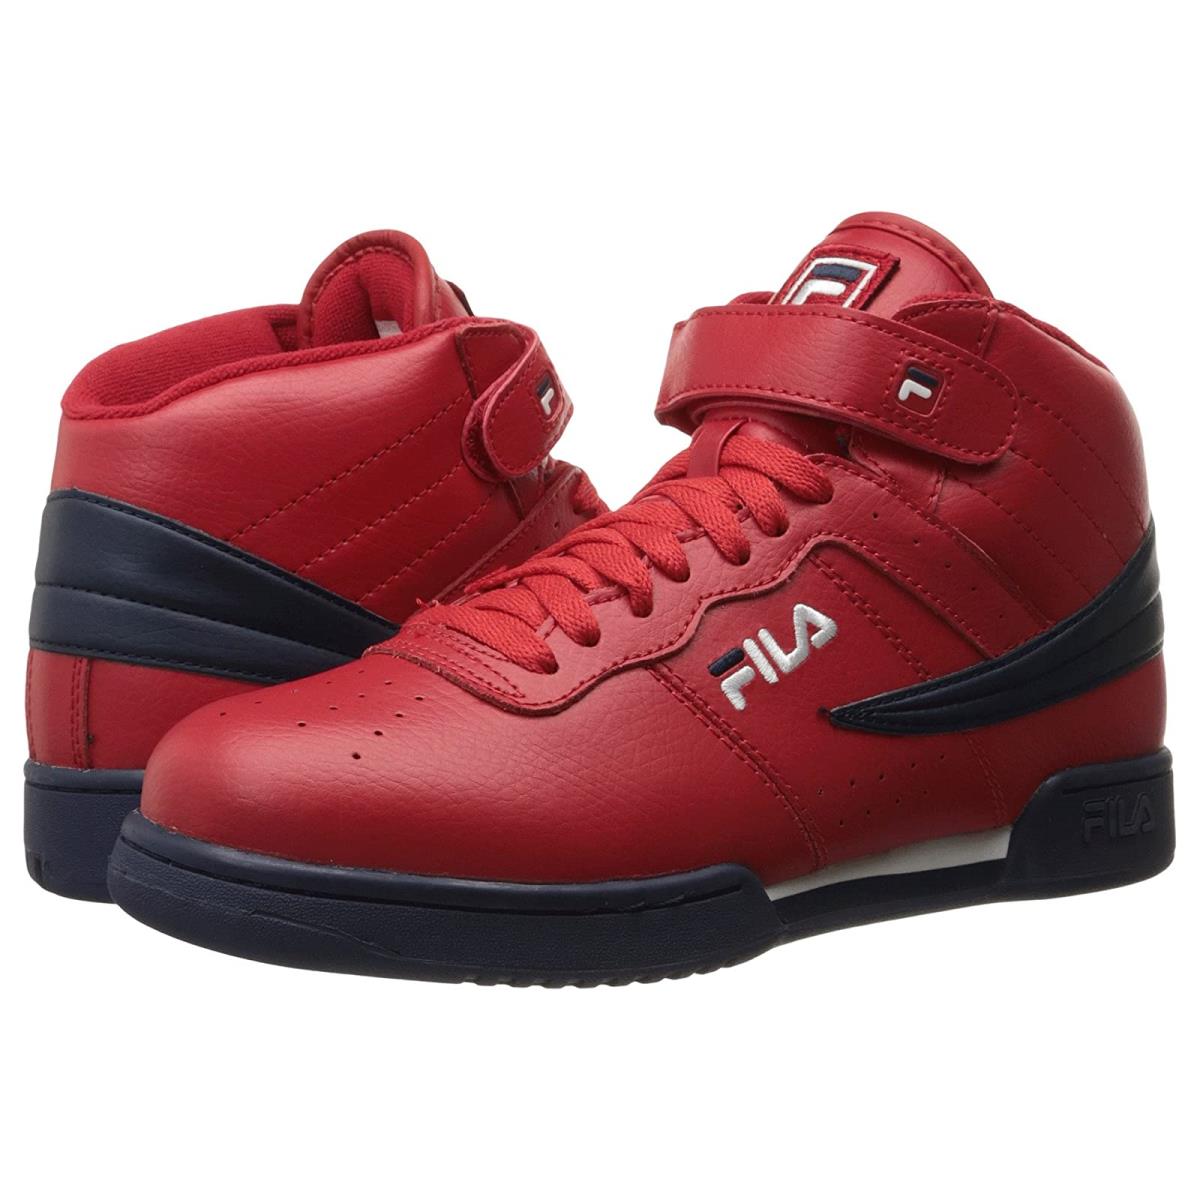 Man`s Sneakers Athletic Shoes Fila F-13V Leather/synthetic Fila Red/Fila Navy/White